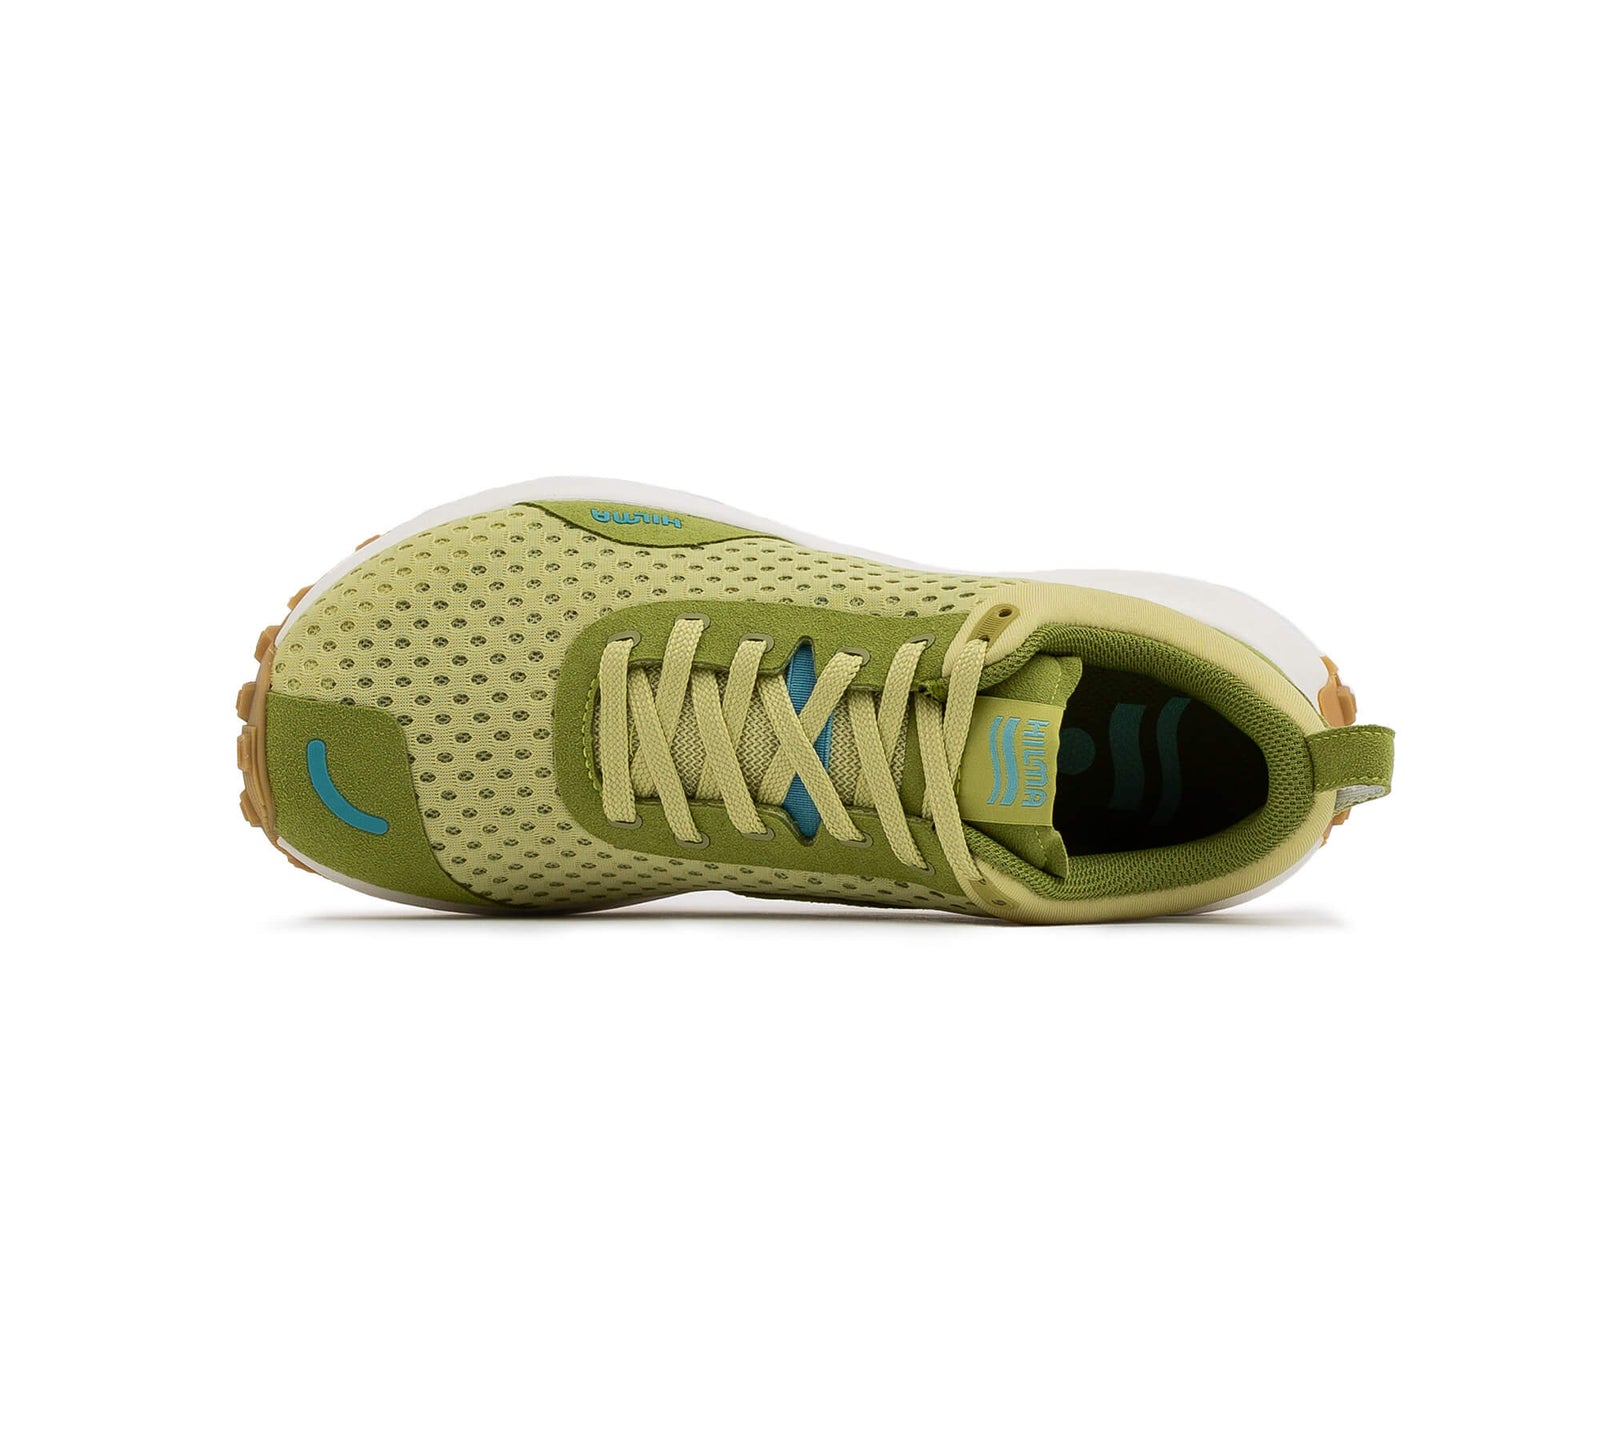 Hilma Running Shoes - Linden Green - Top of Shoes